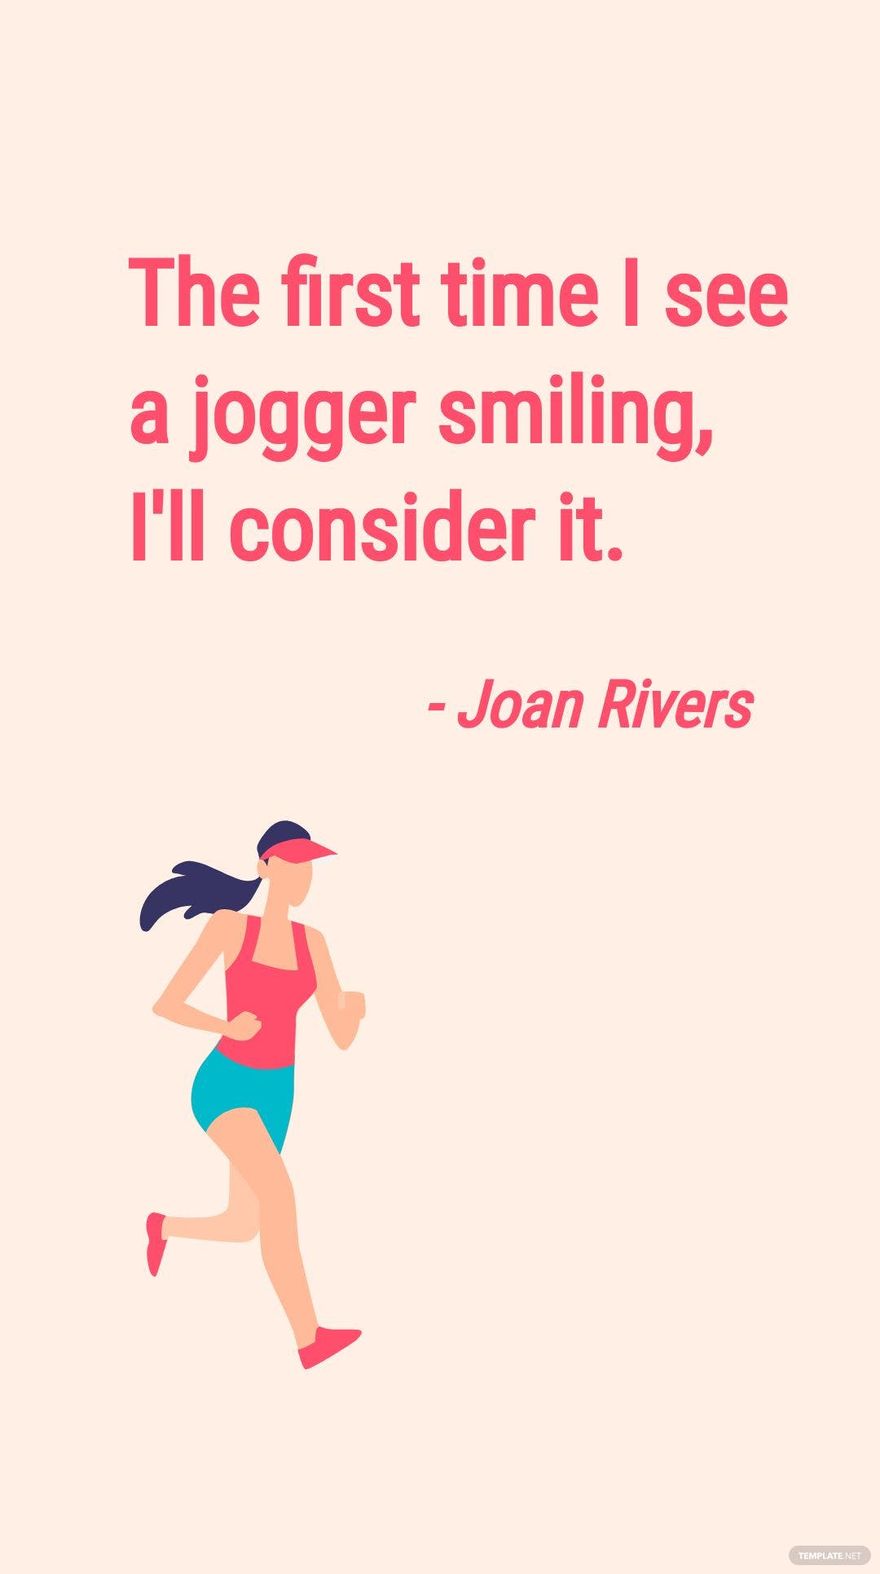 Free Joan Rivers - The first time I see a jogger smiling, I'll consider it. in JPG